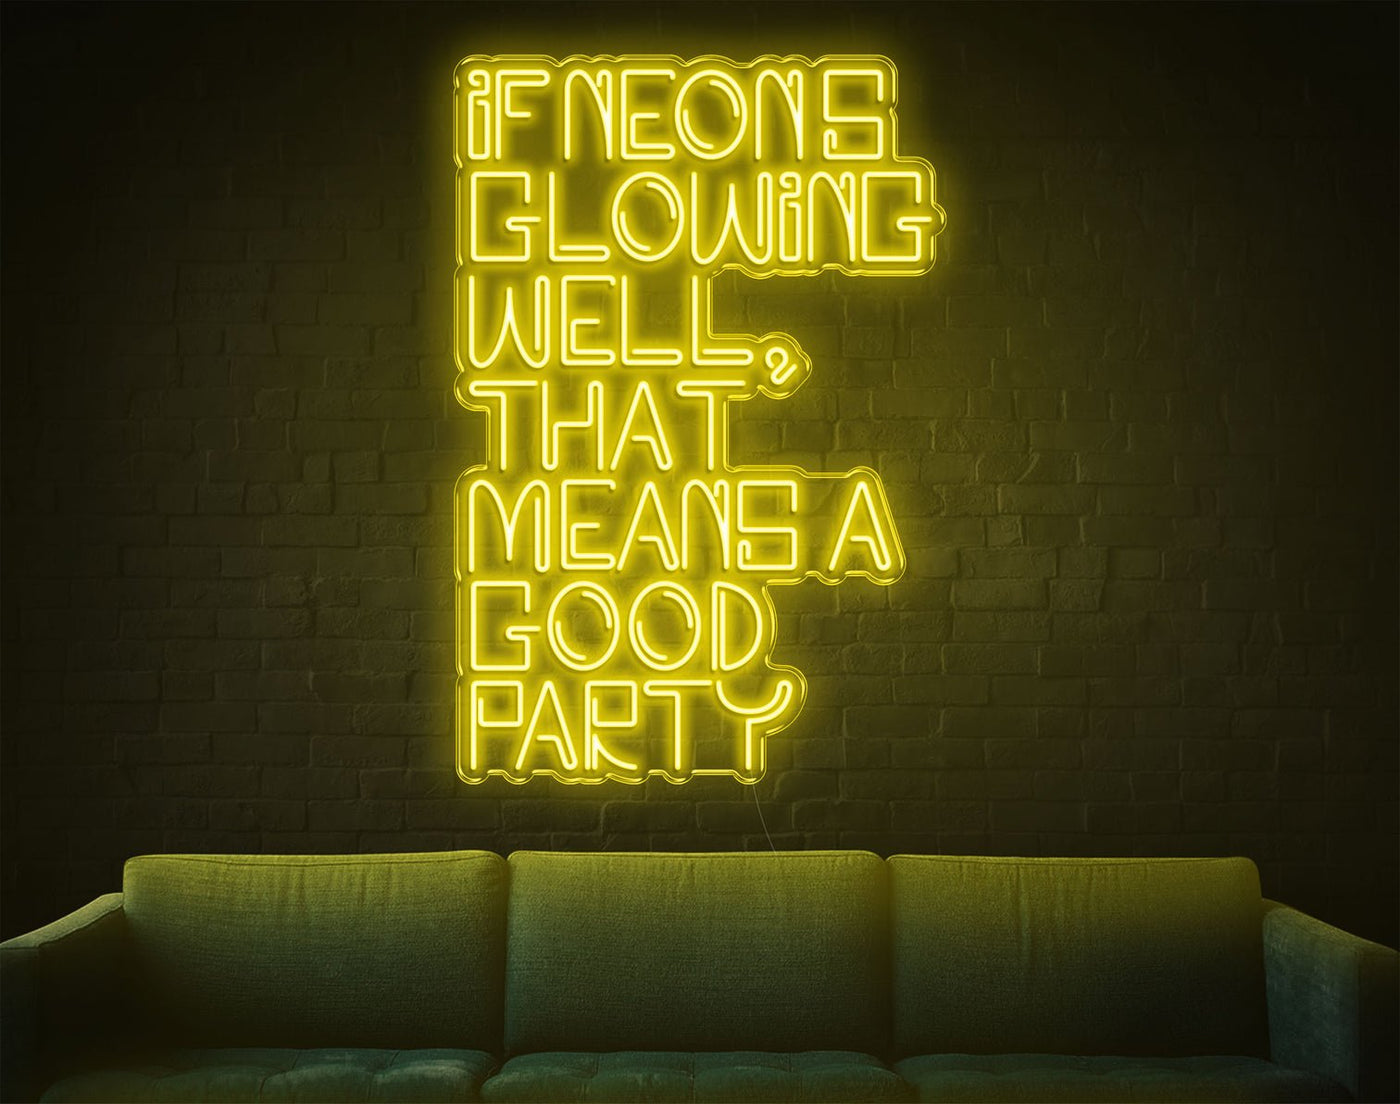 If Neons Glowing Well That Means A Good Party LED Neon Sign - 41inch x 28inchYellow